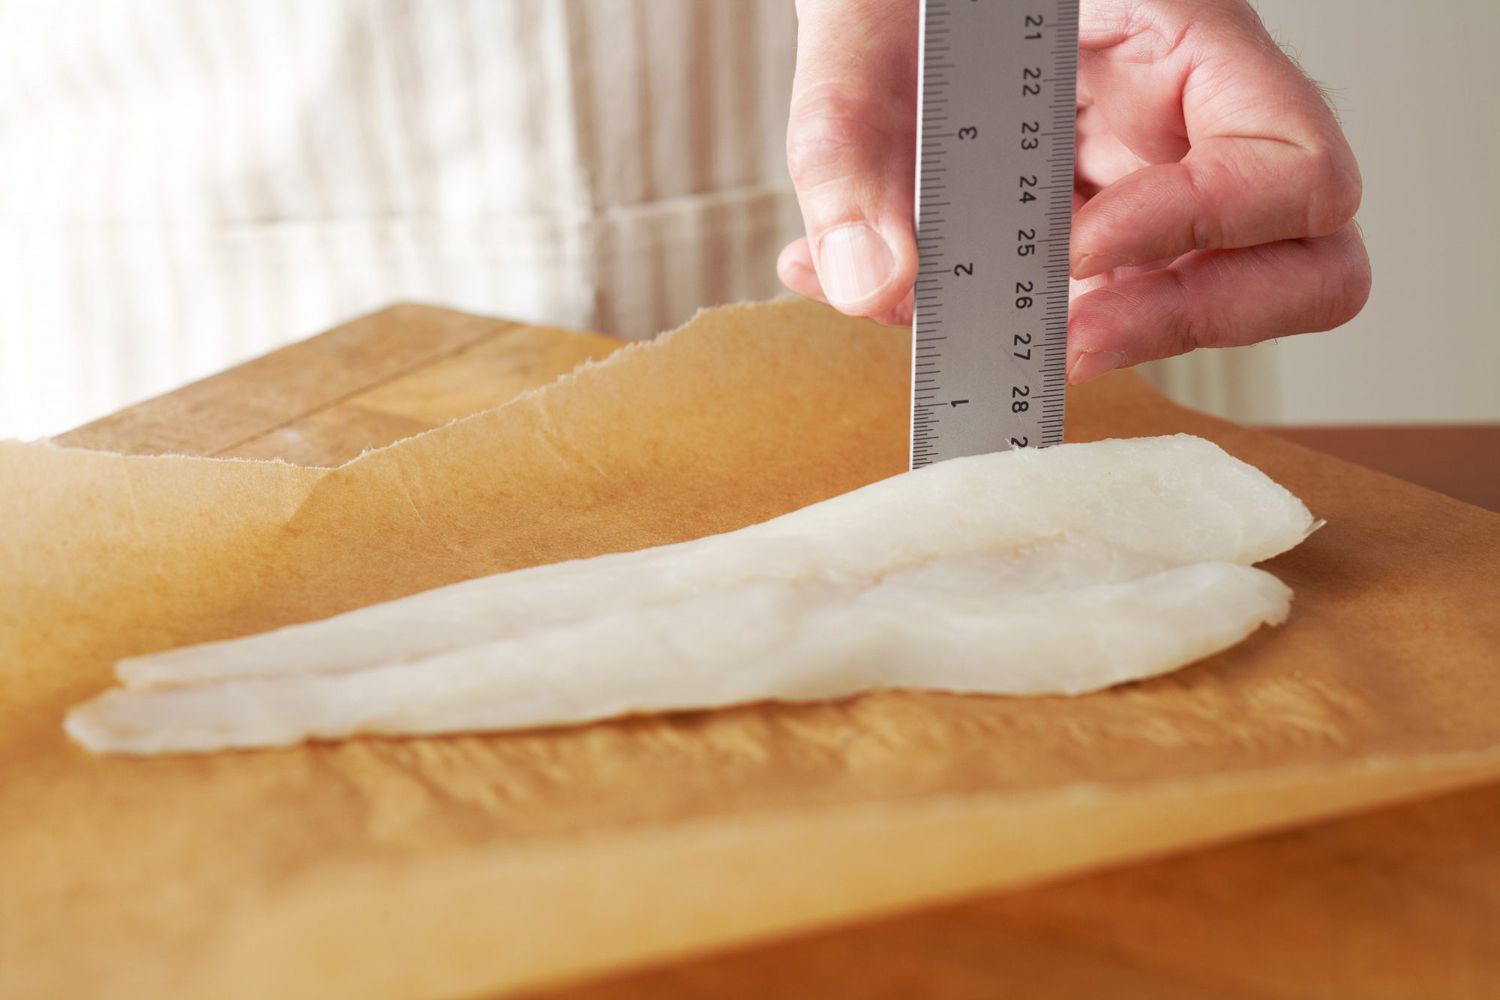 measuring raw fish with ruler